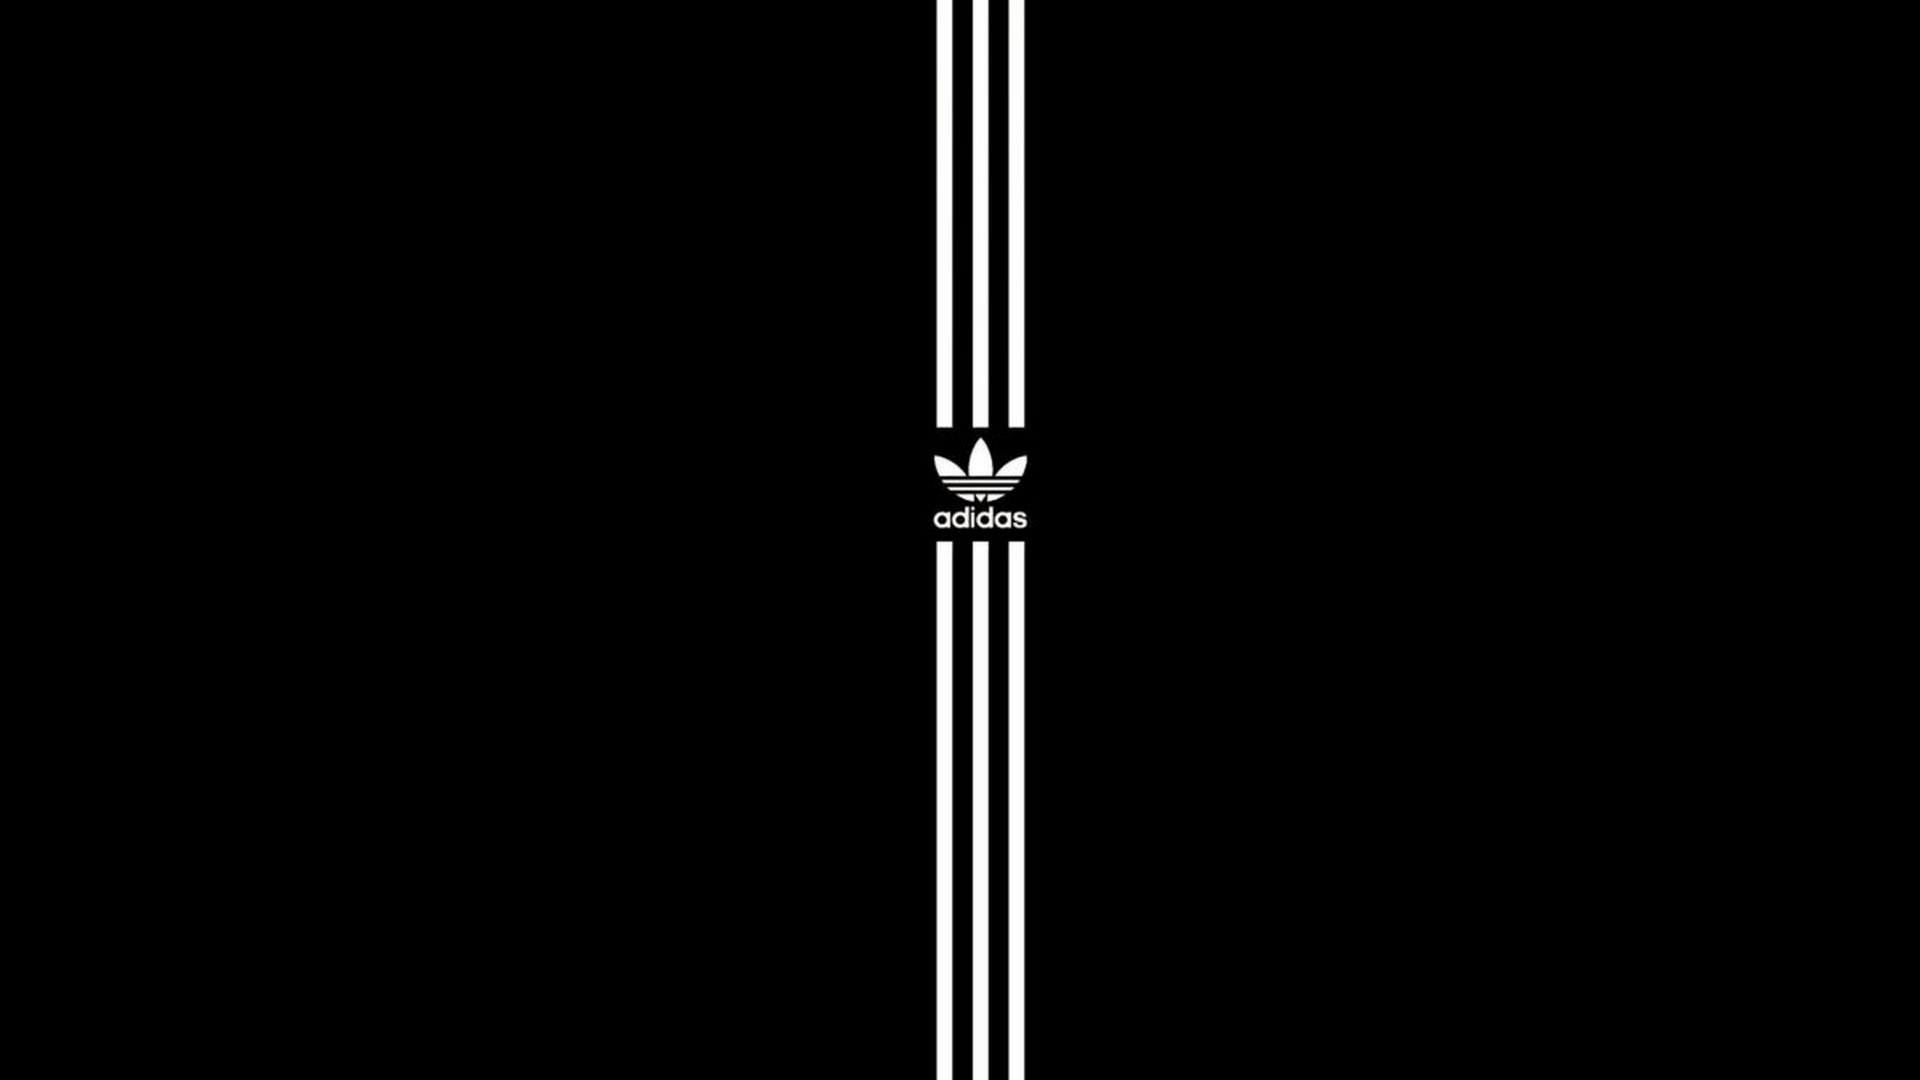 Wallpaper Adidas Logo Desktop with high-resolution 1920x1080 pixel. You can use this wallpaper for your Windows and Mac OS computers as well as your Android and iPhone smartphones